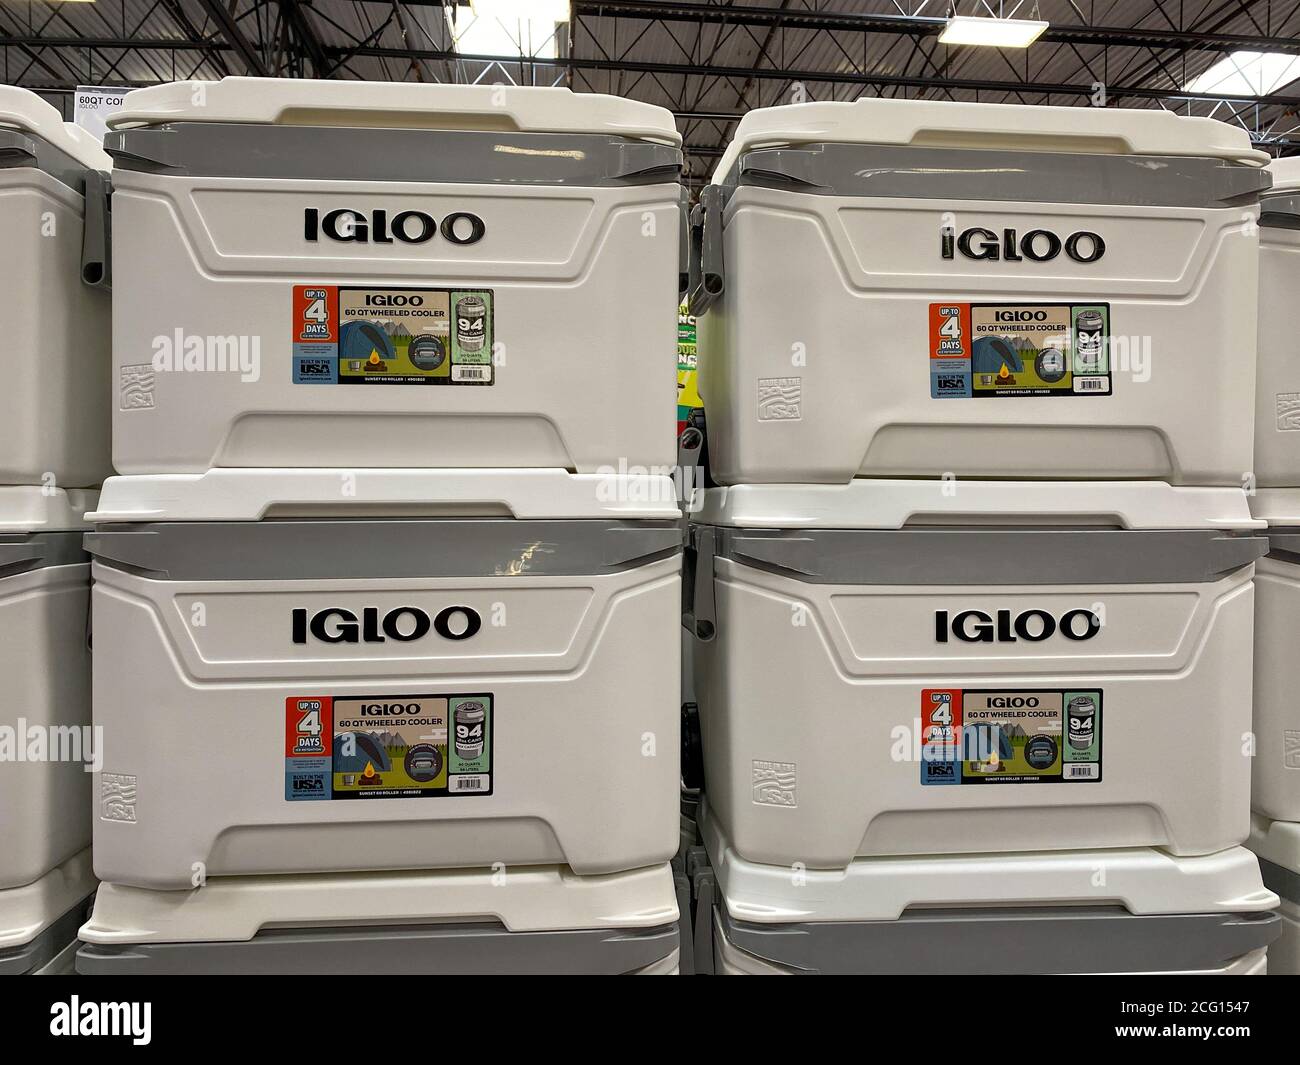 Orlando, FL/USA-7/14/20: A stack of Igloo Coolers for sale at a Sam's Club  warehouse store Stock Photo - Alamy